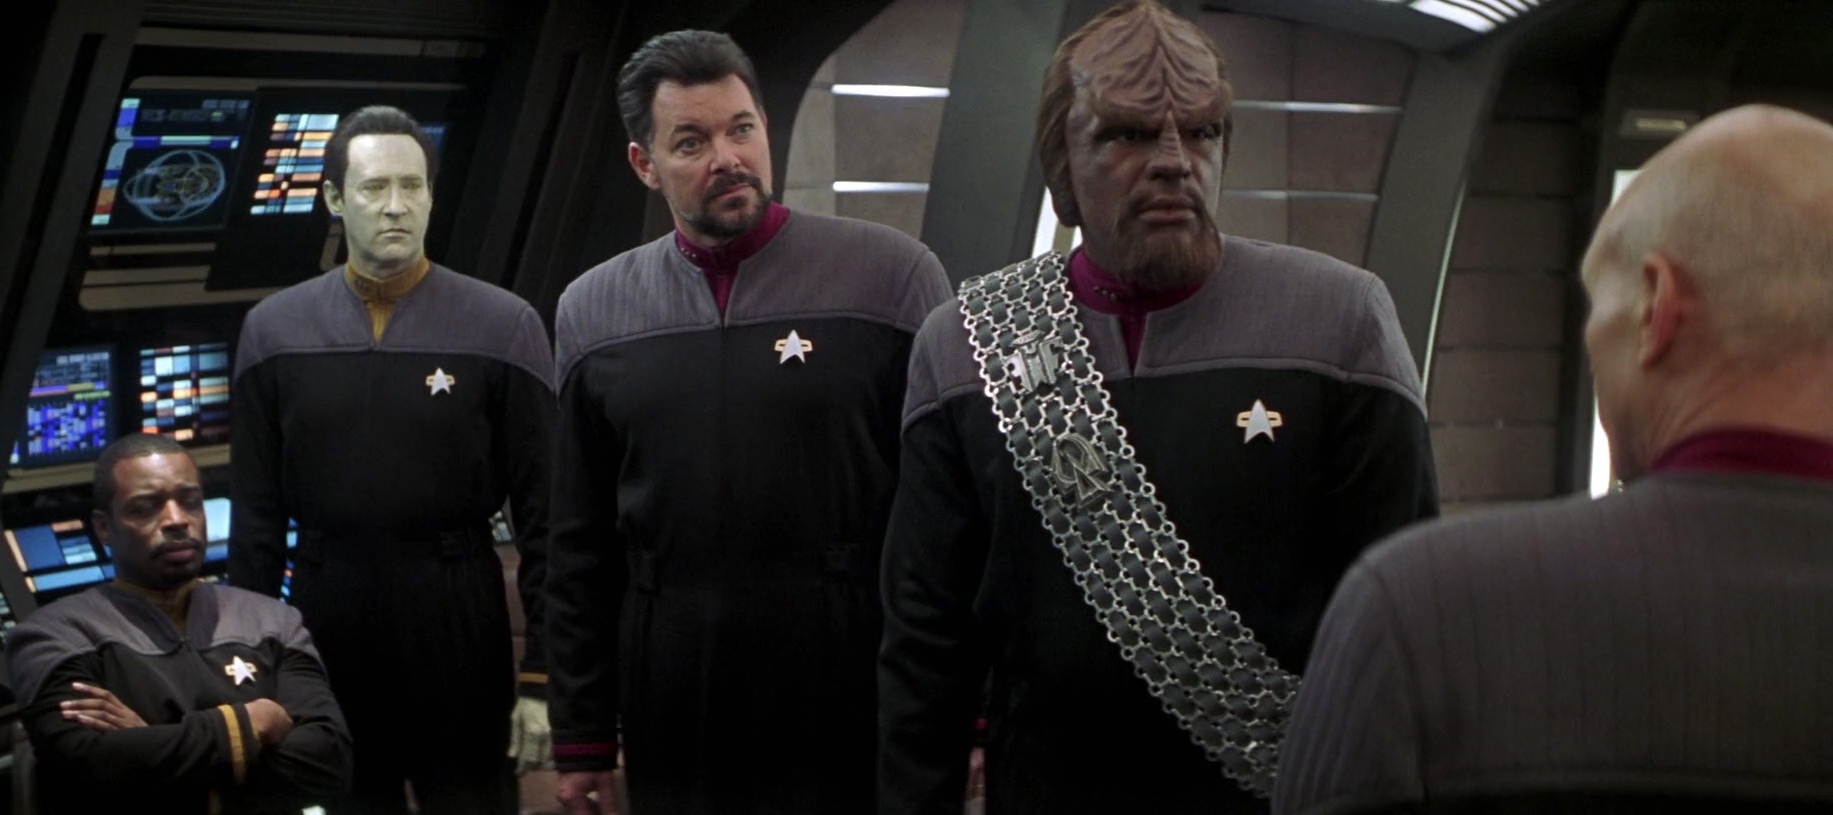 The crew aboard the Enterprise in a TNG feature film.